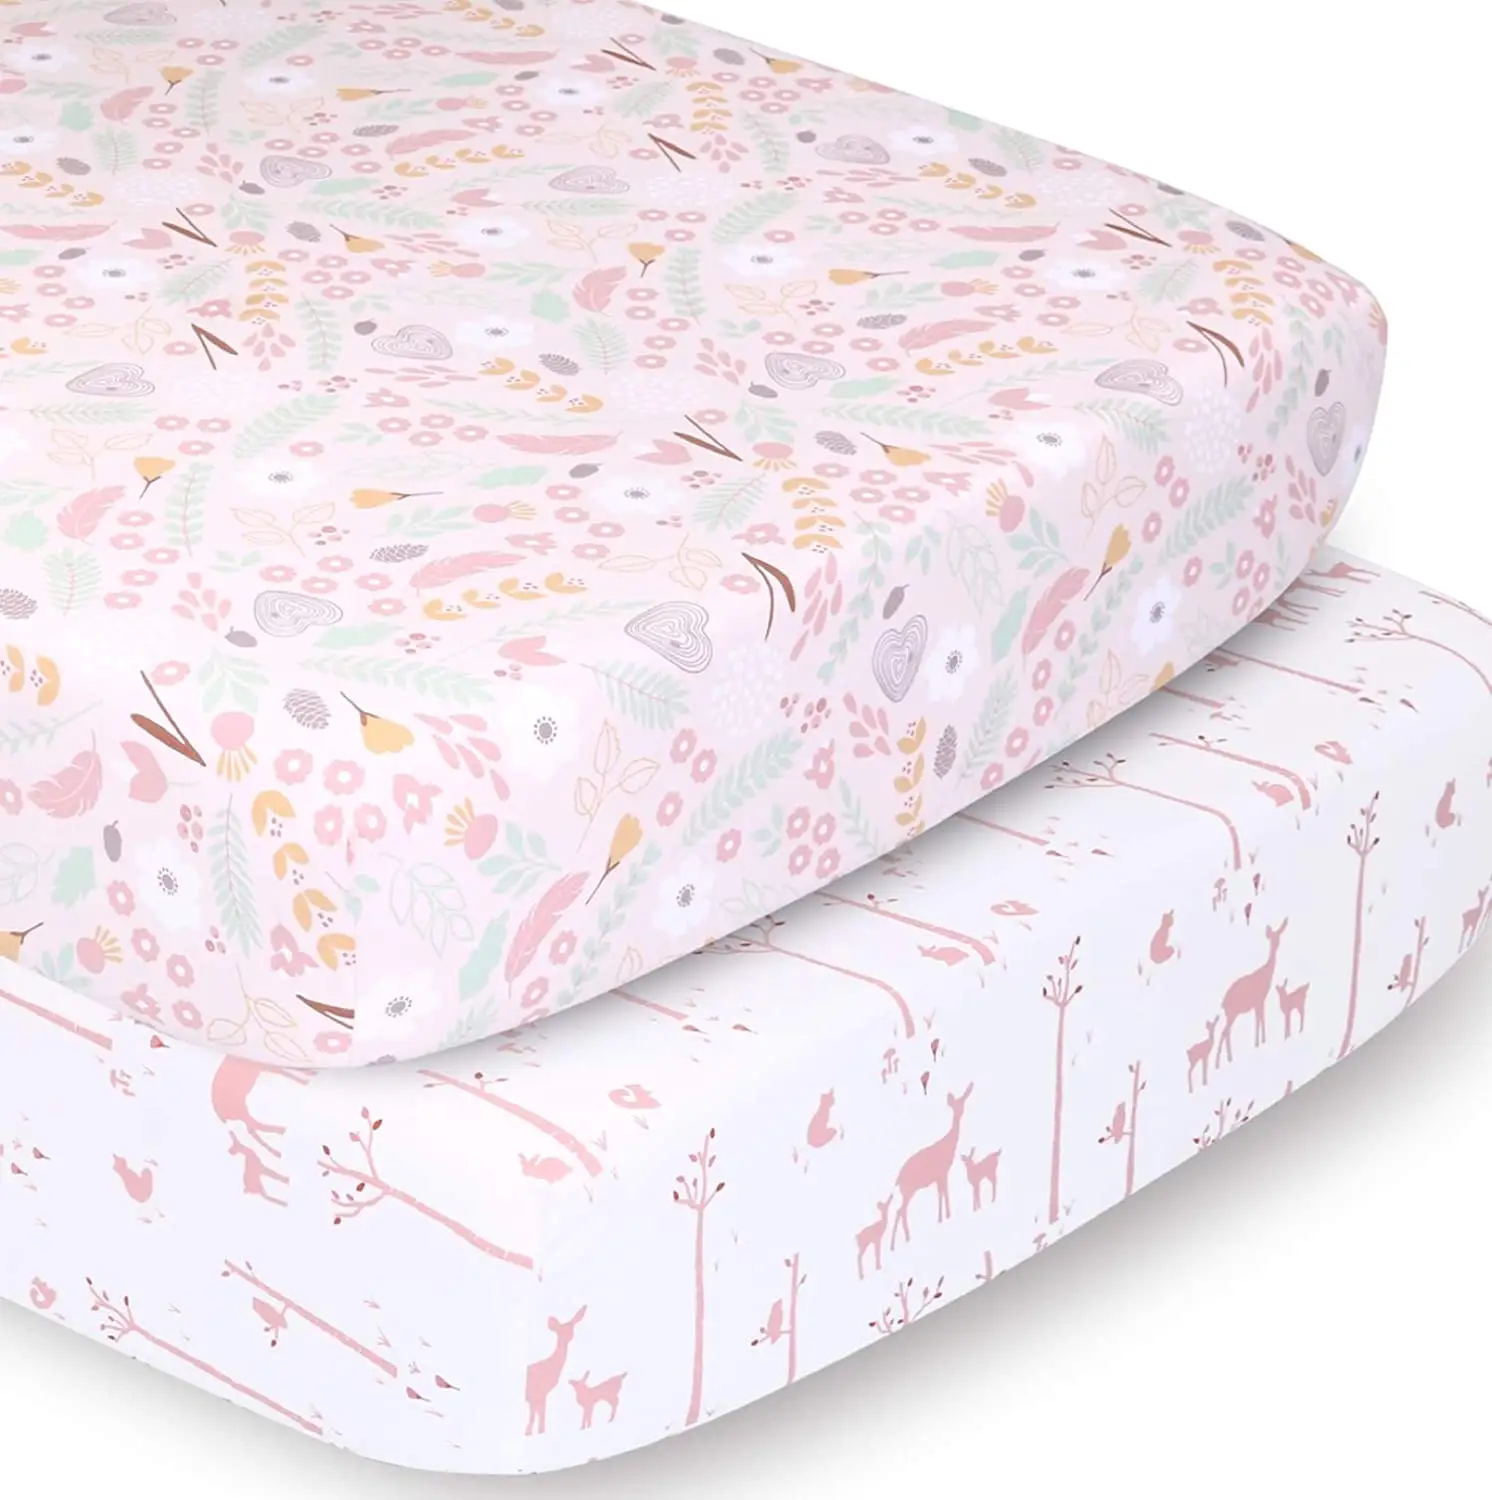 Ultra Soft microfiber Pink Floral and Woodland Animals 2pcs crib sheet set for baby girls